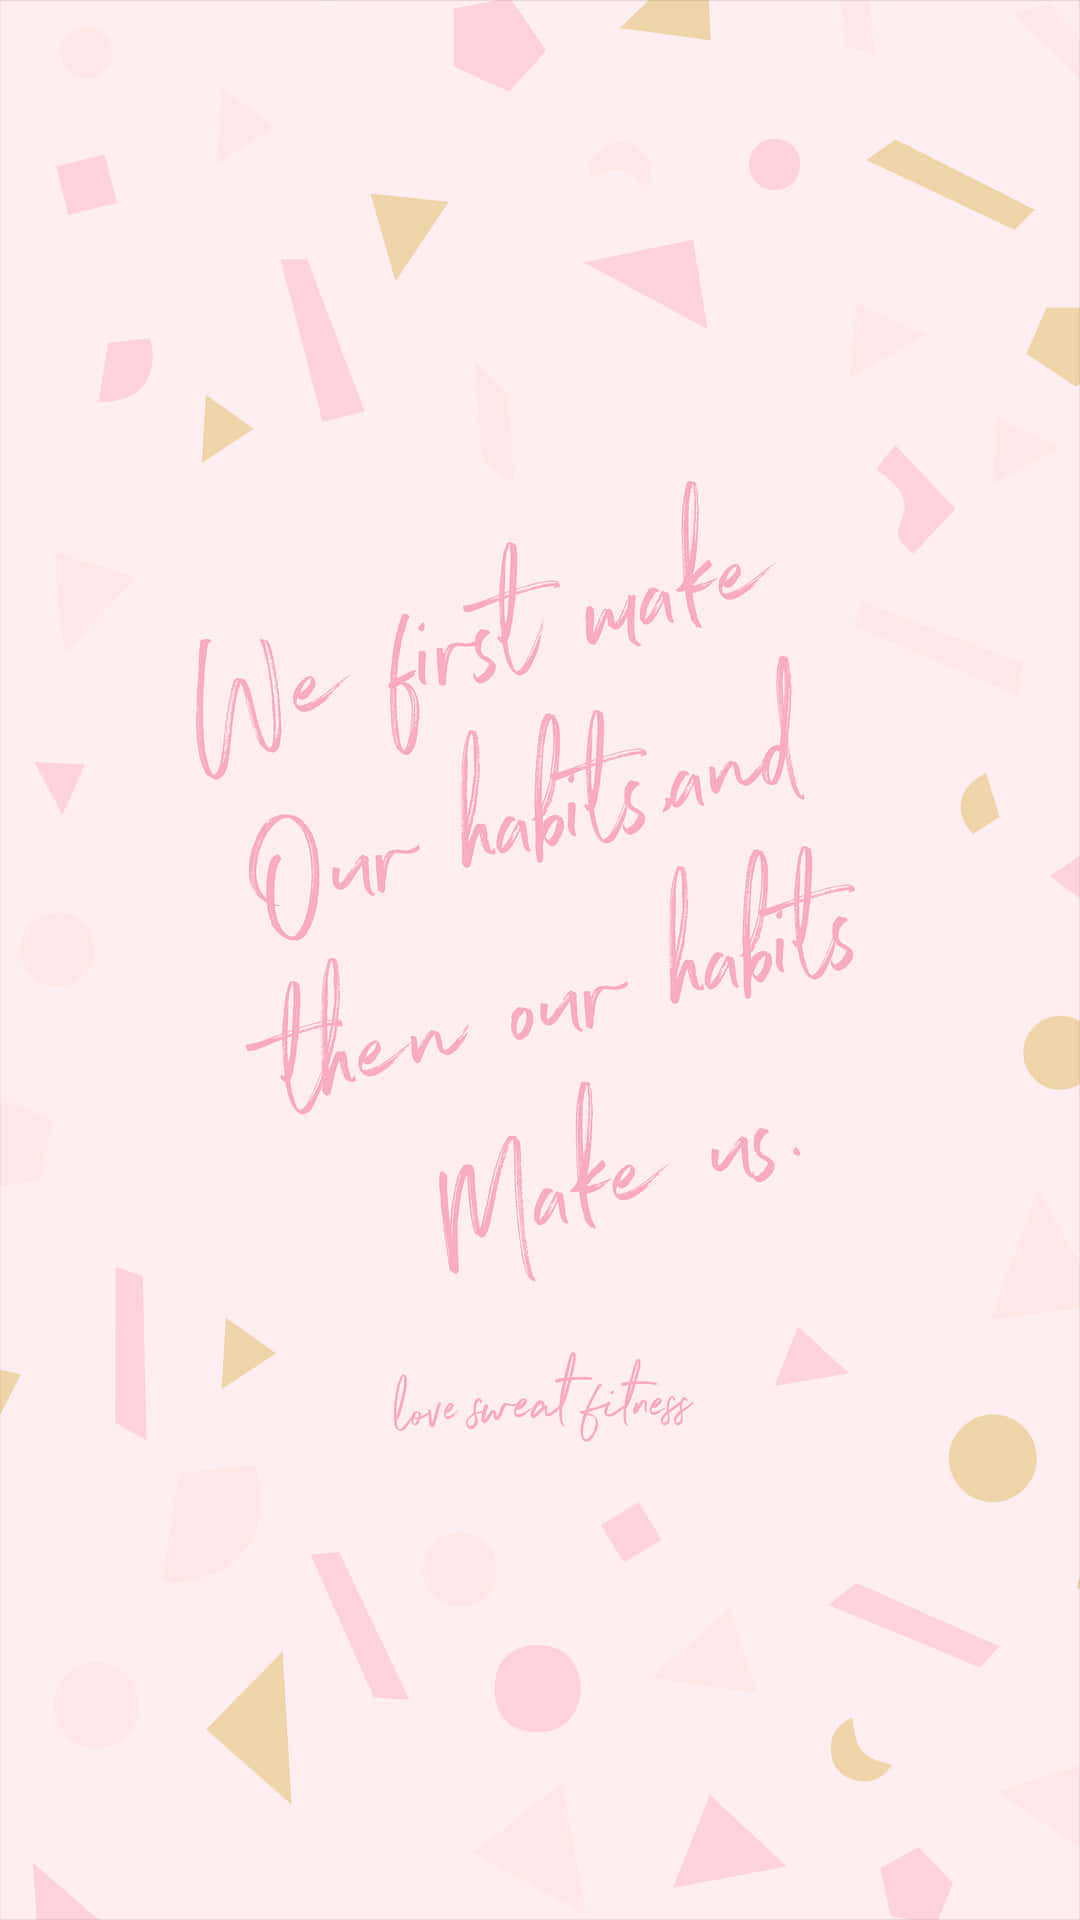 We First Work Our Habits And Then Our Habits Make Us